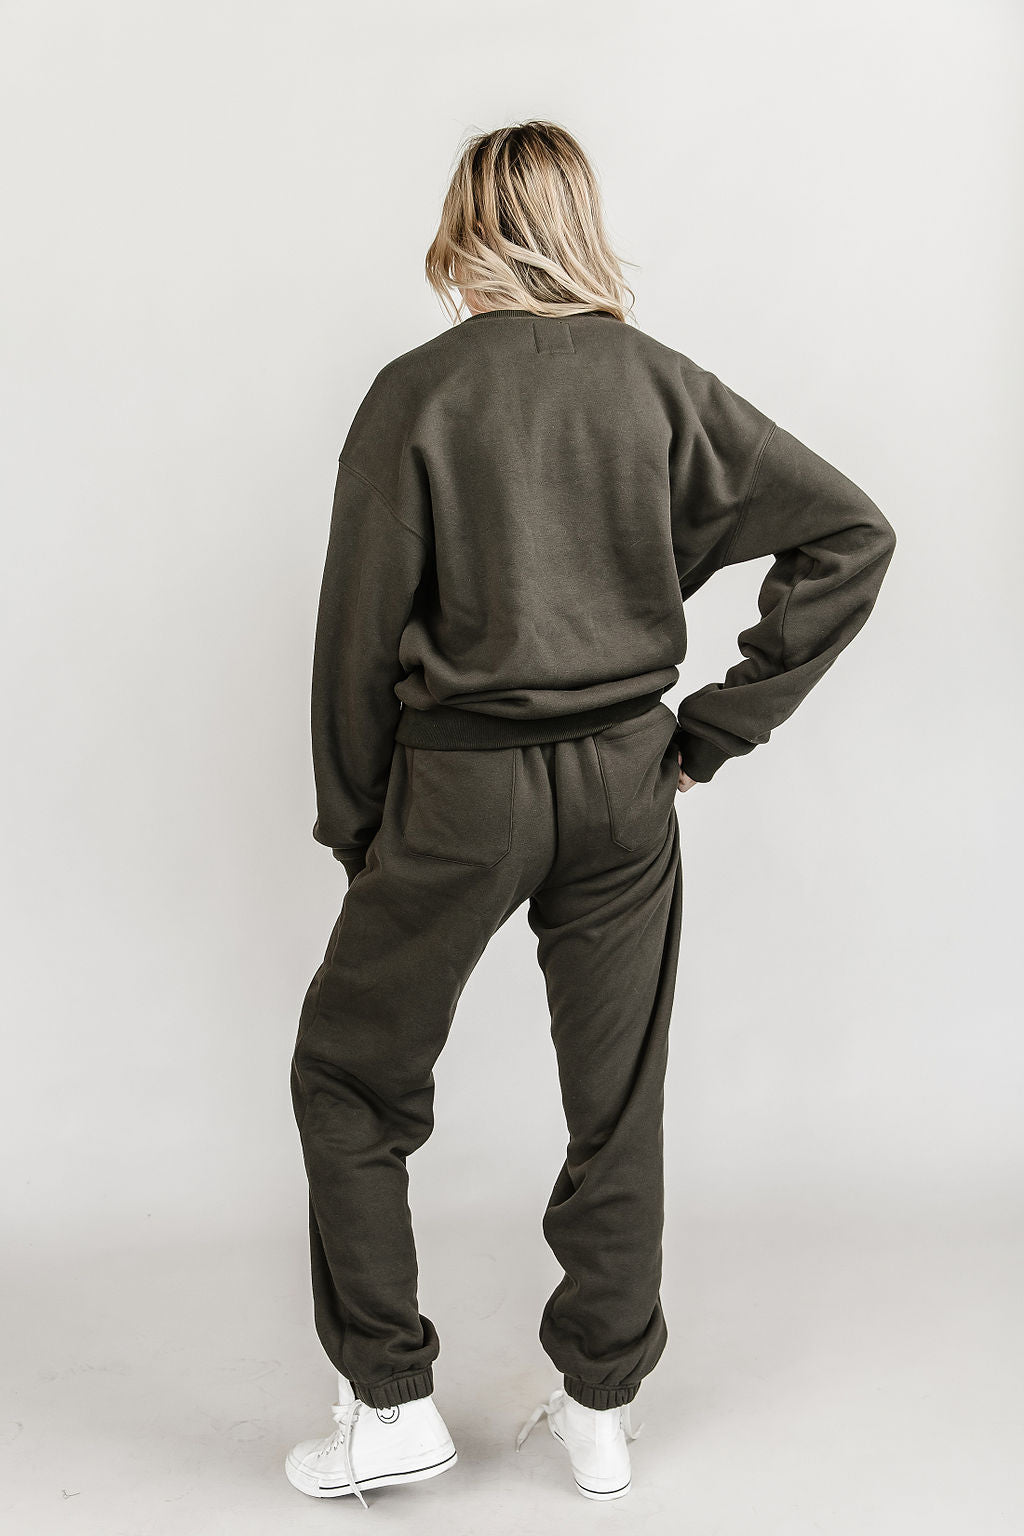 Ampersand & Ave Offline Jogger in charcoal